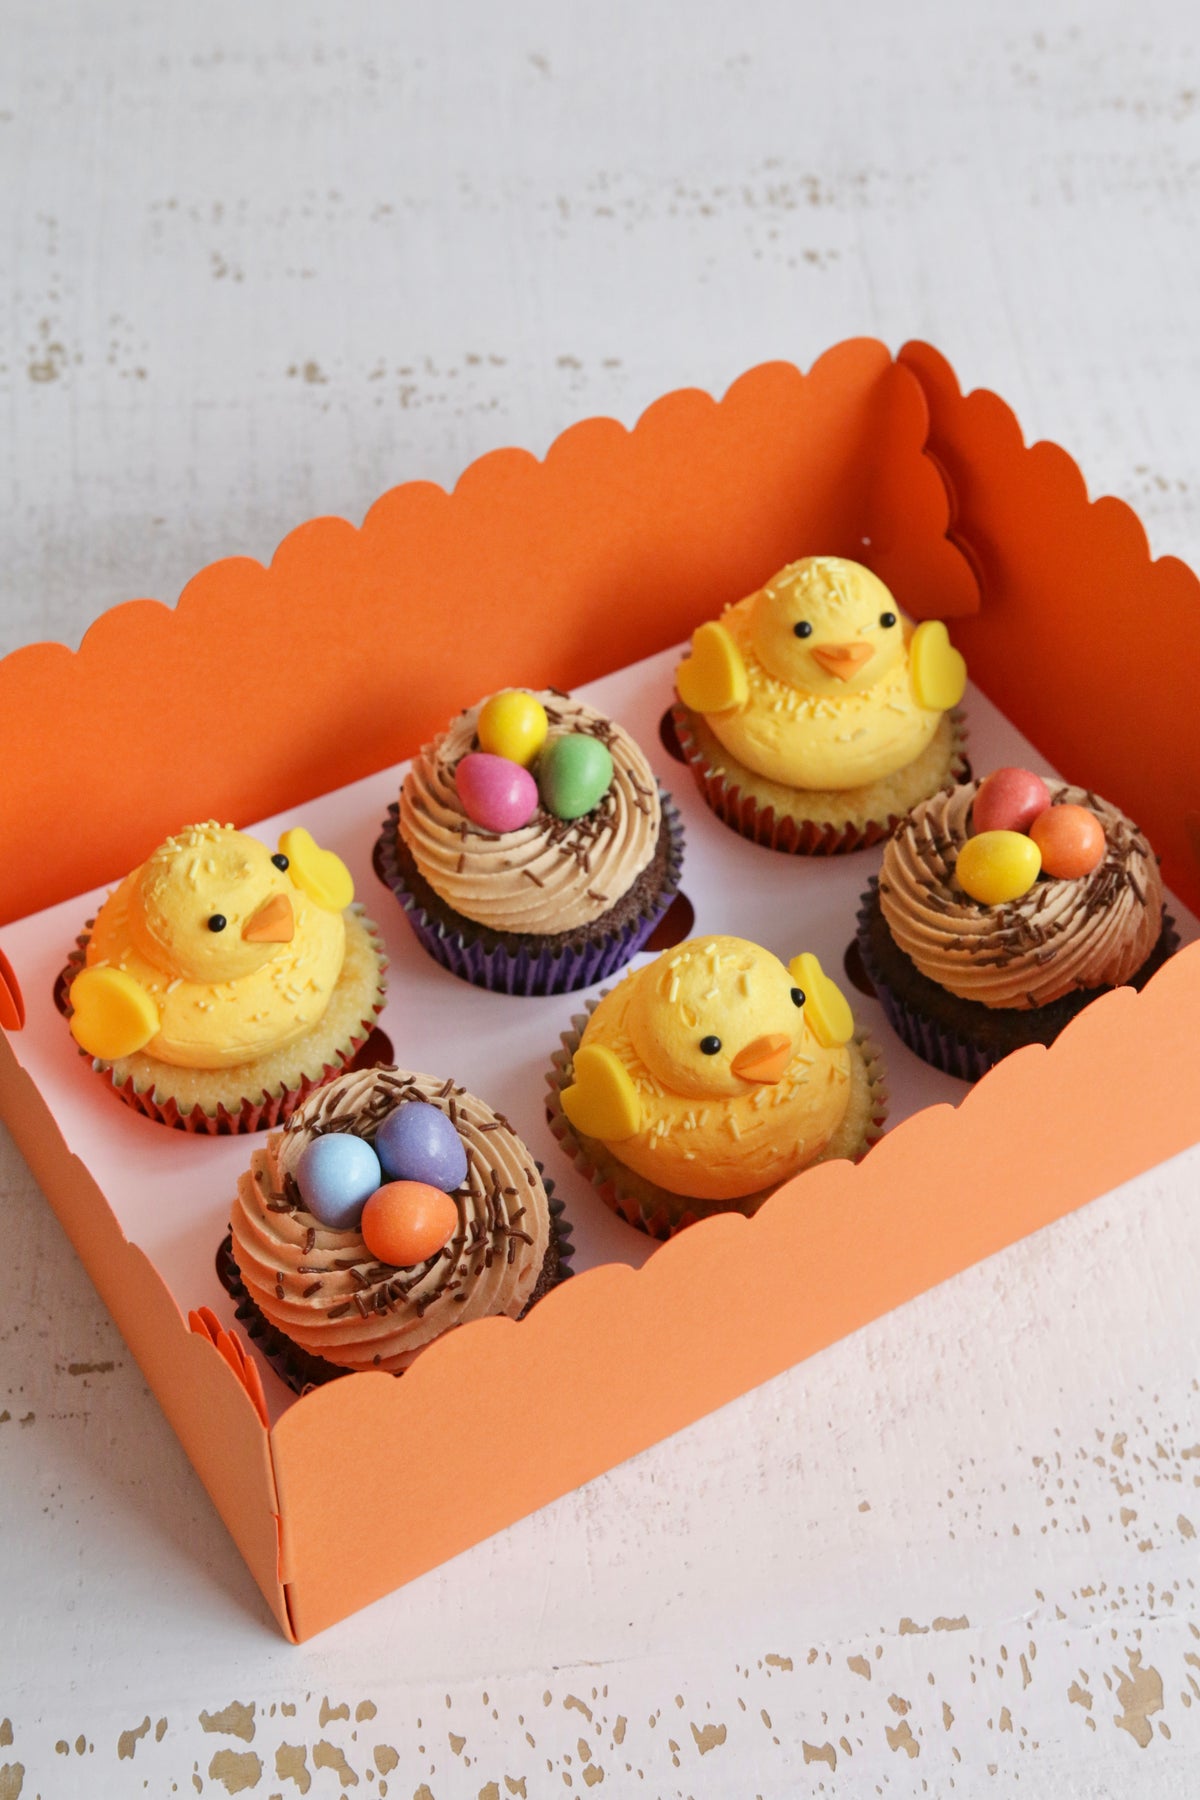 Cheery Chick & Easter Egg Nest Cupcakes